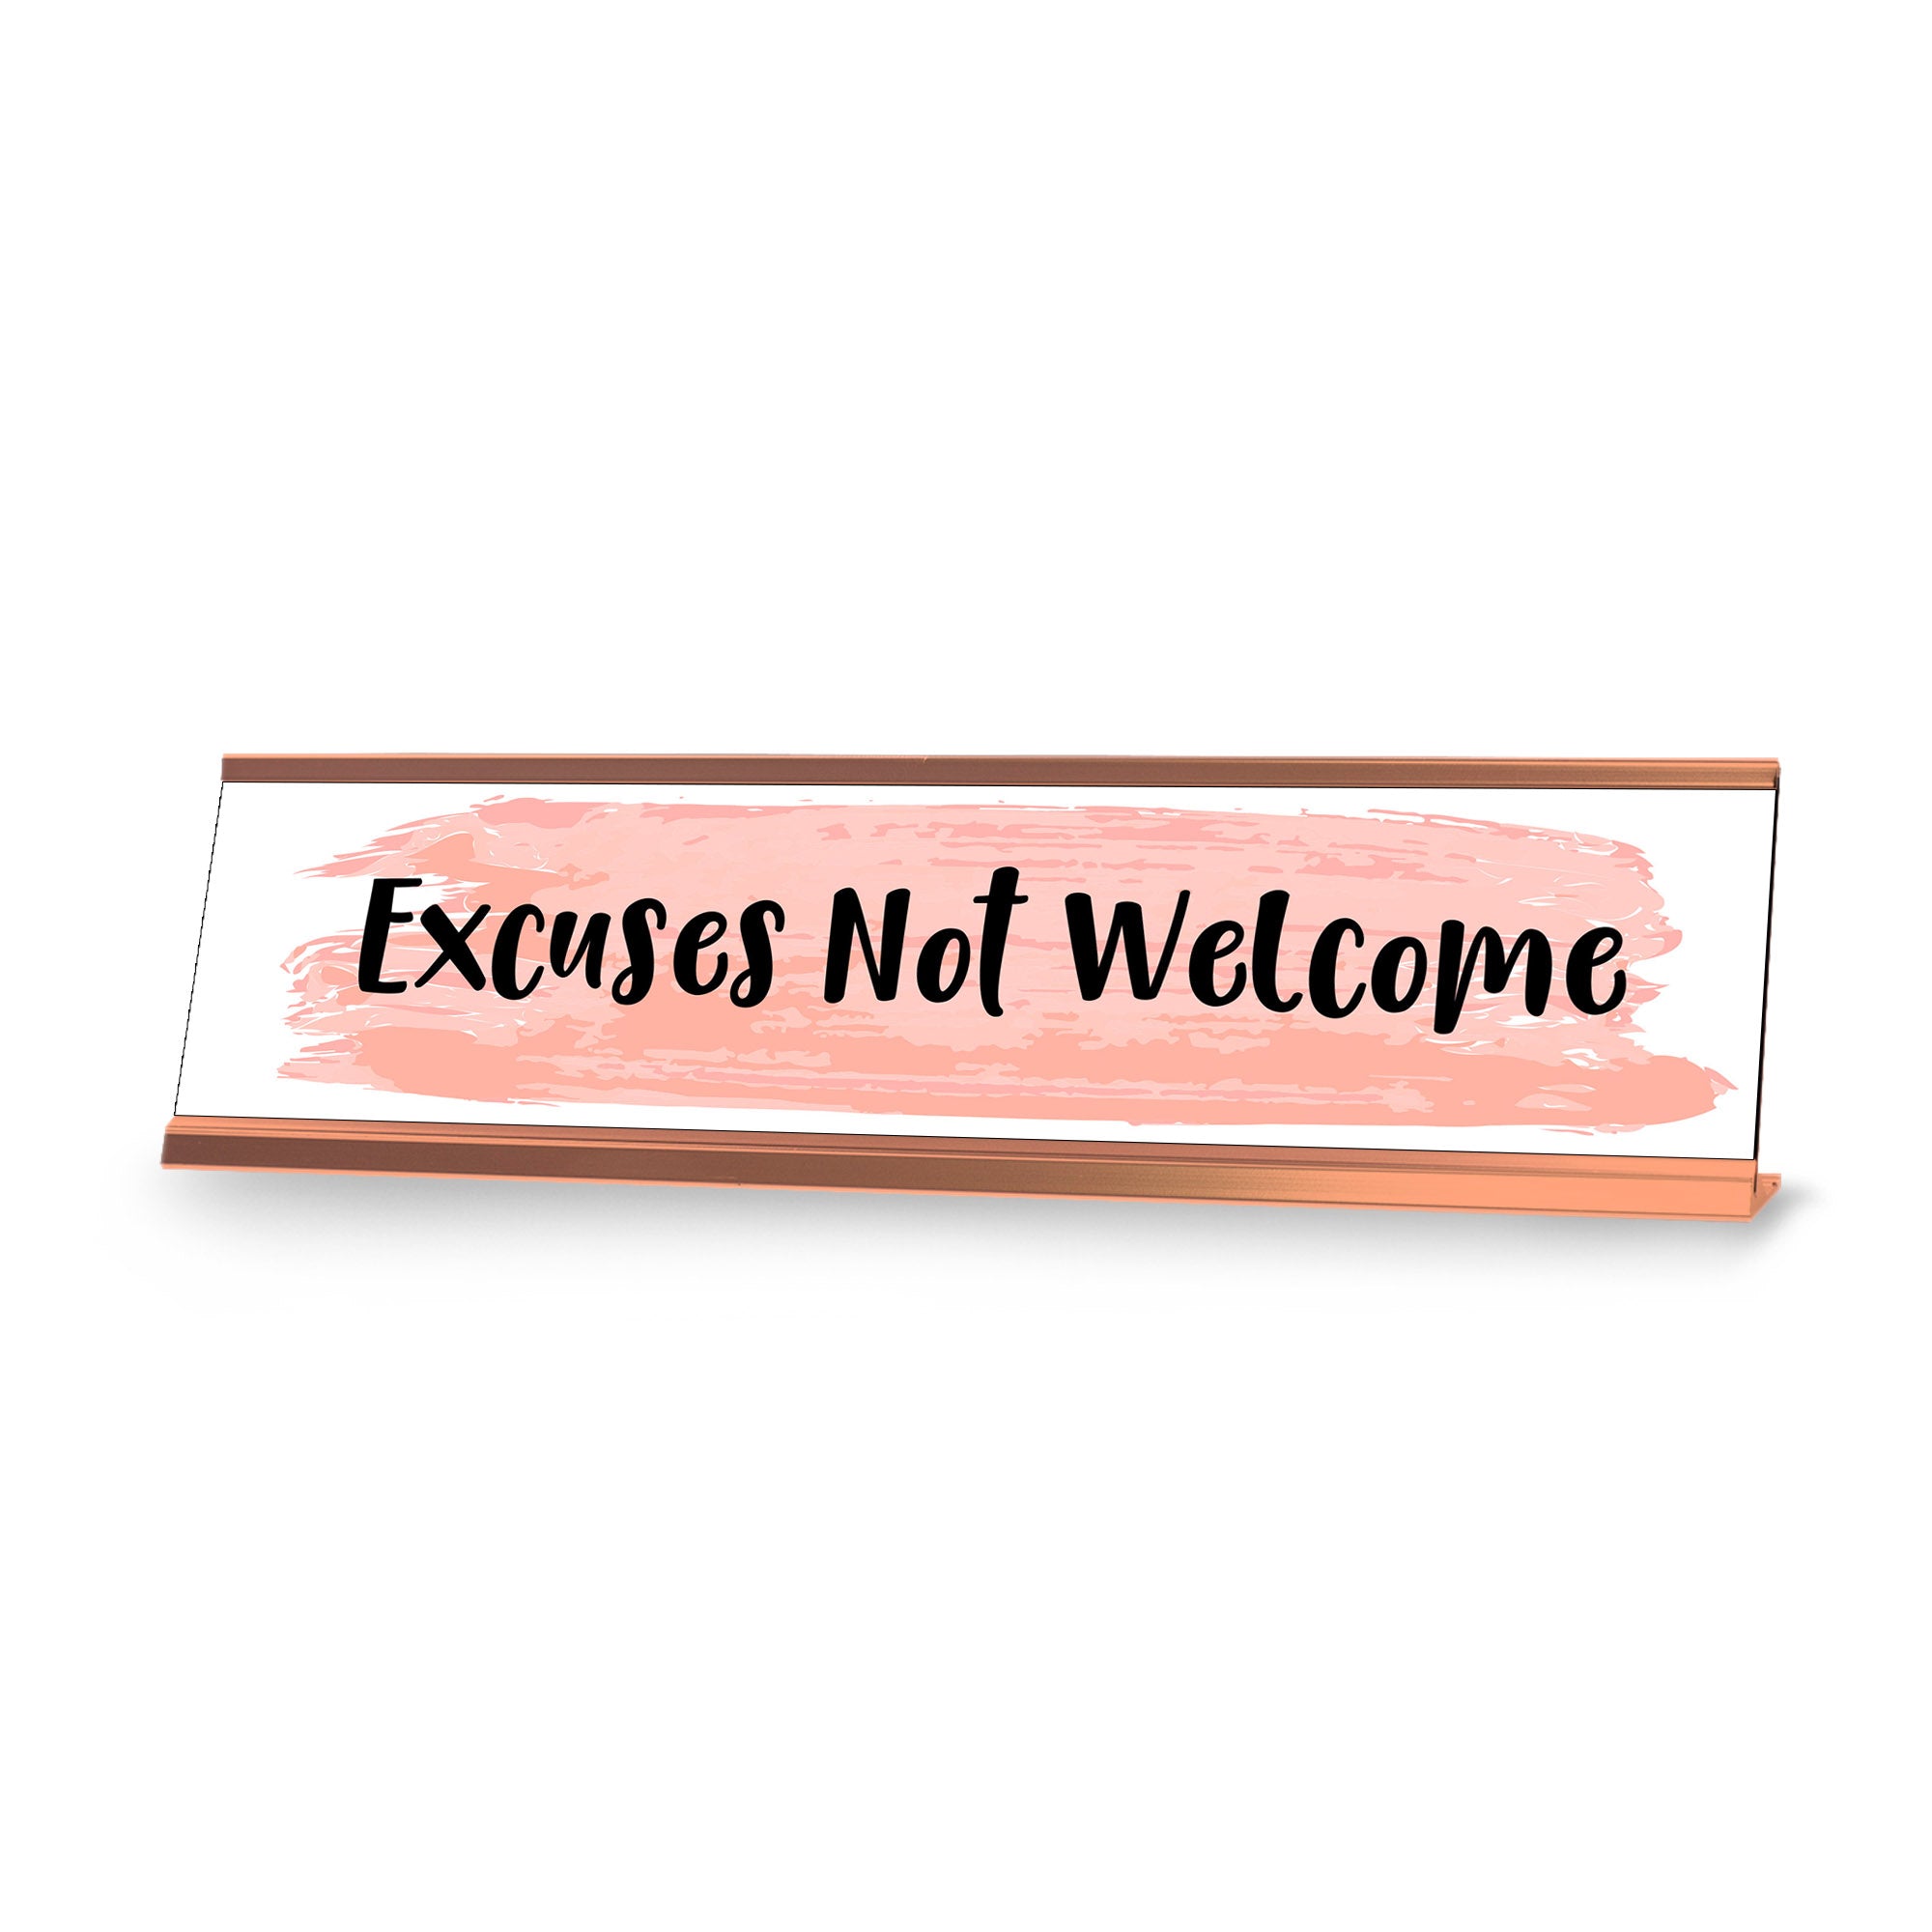 Excuses Not Welcome, Designer Series Desk Sign Novelty Nameplate (2 x 8")